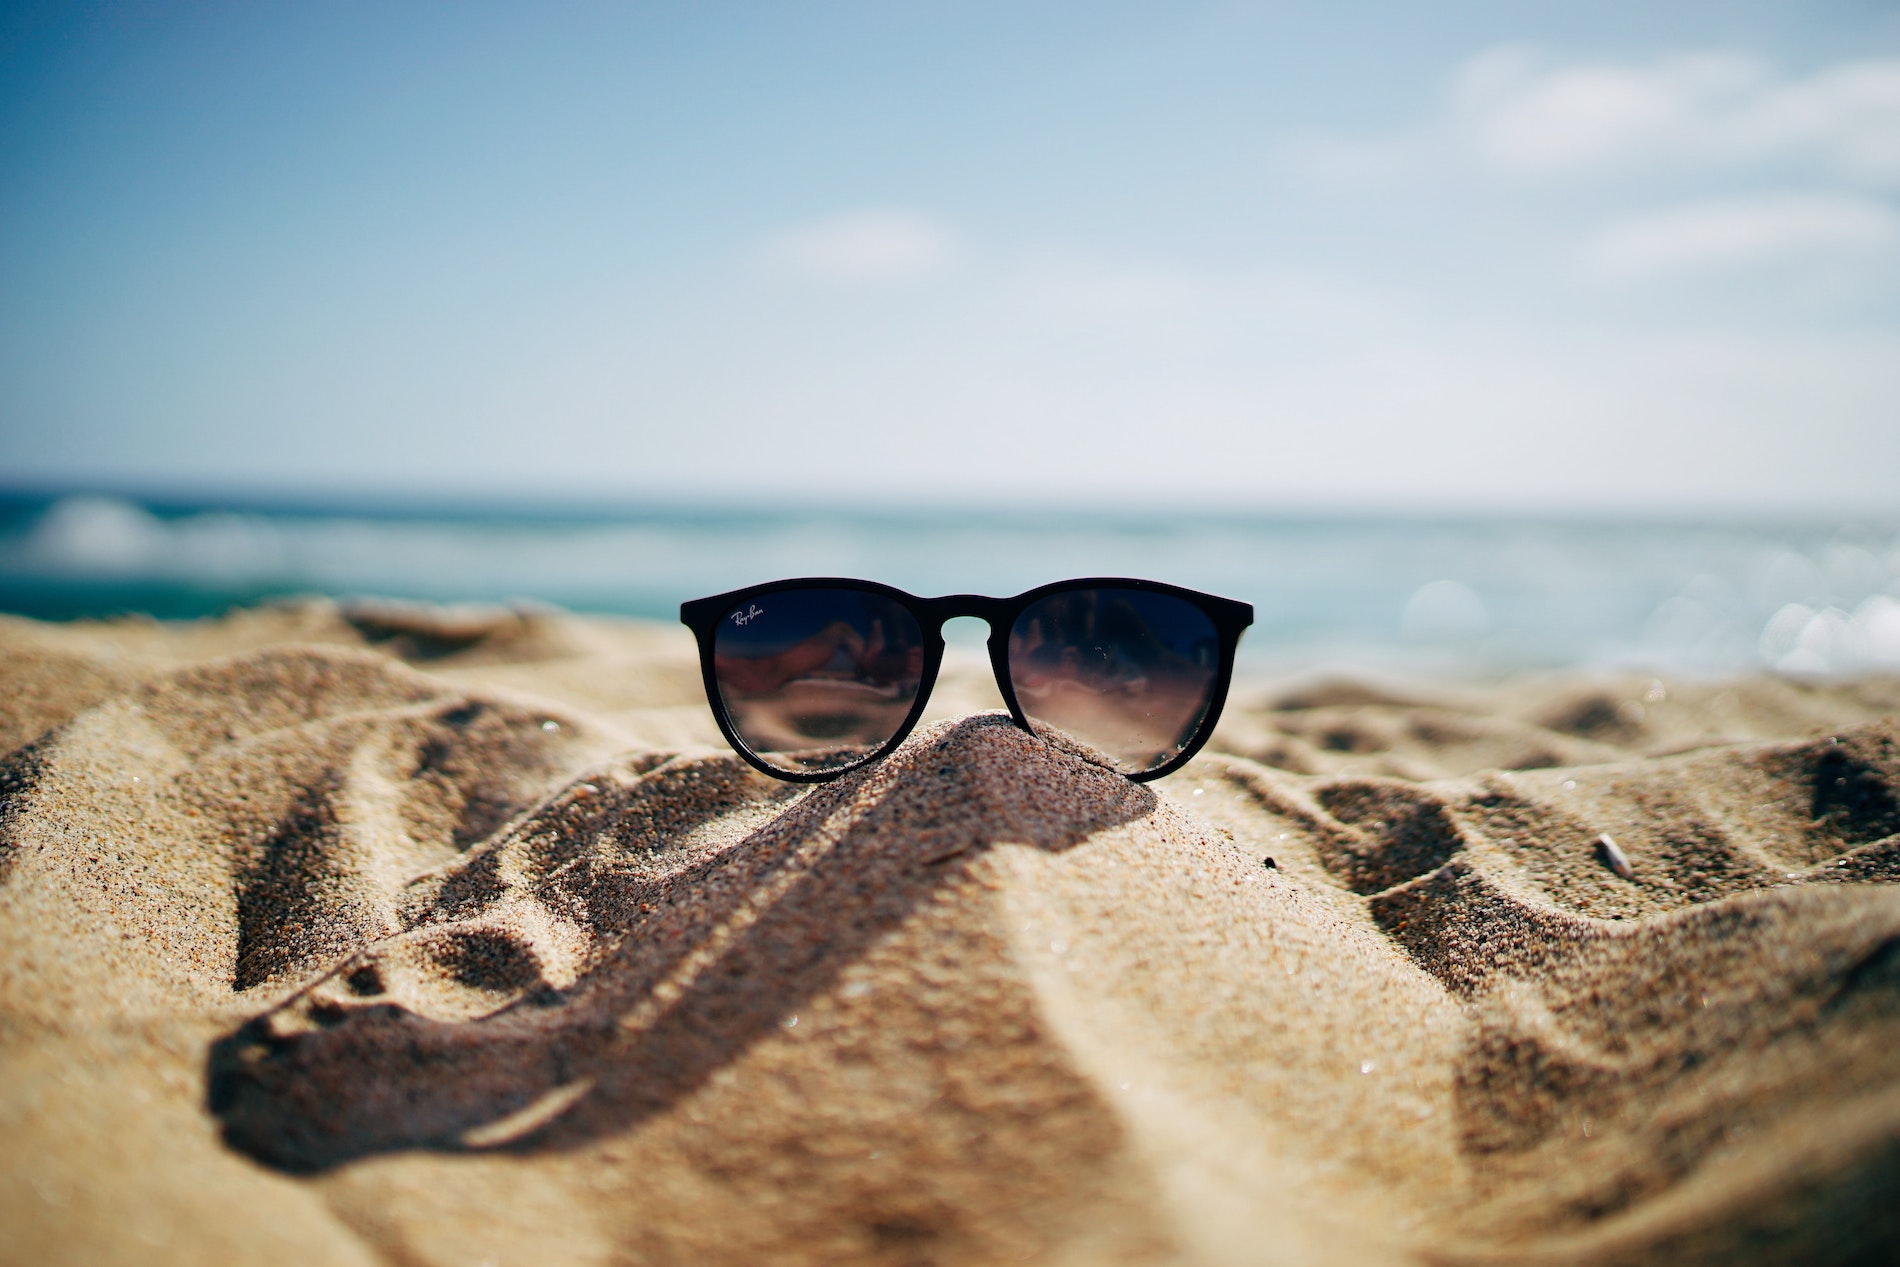 Photo of sunglasses at the beach to illustrated How to Stay Engaged During the Summer.